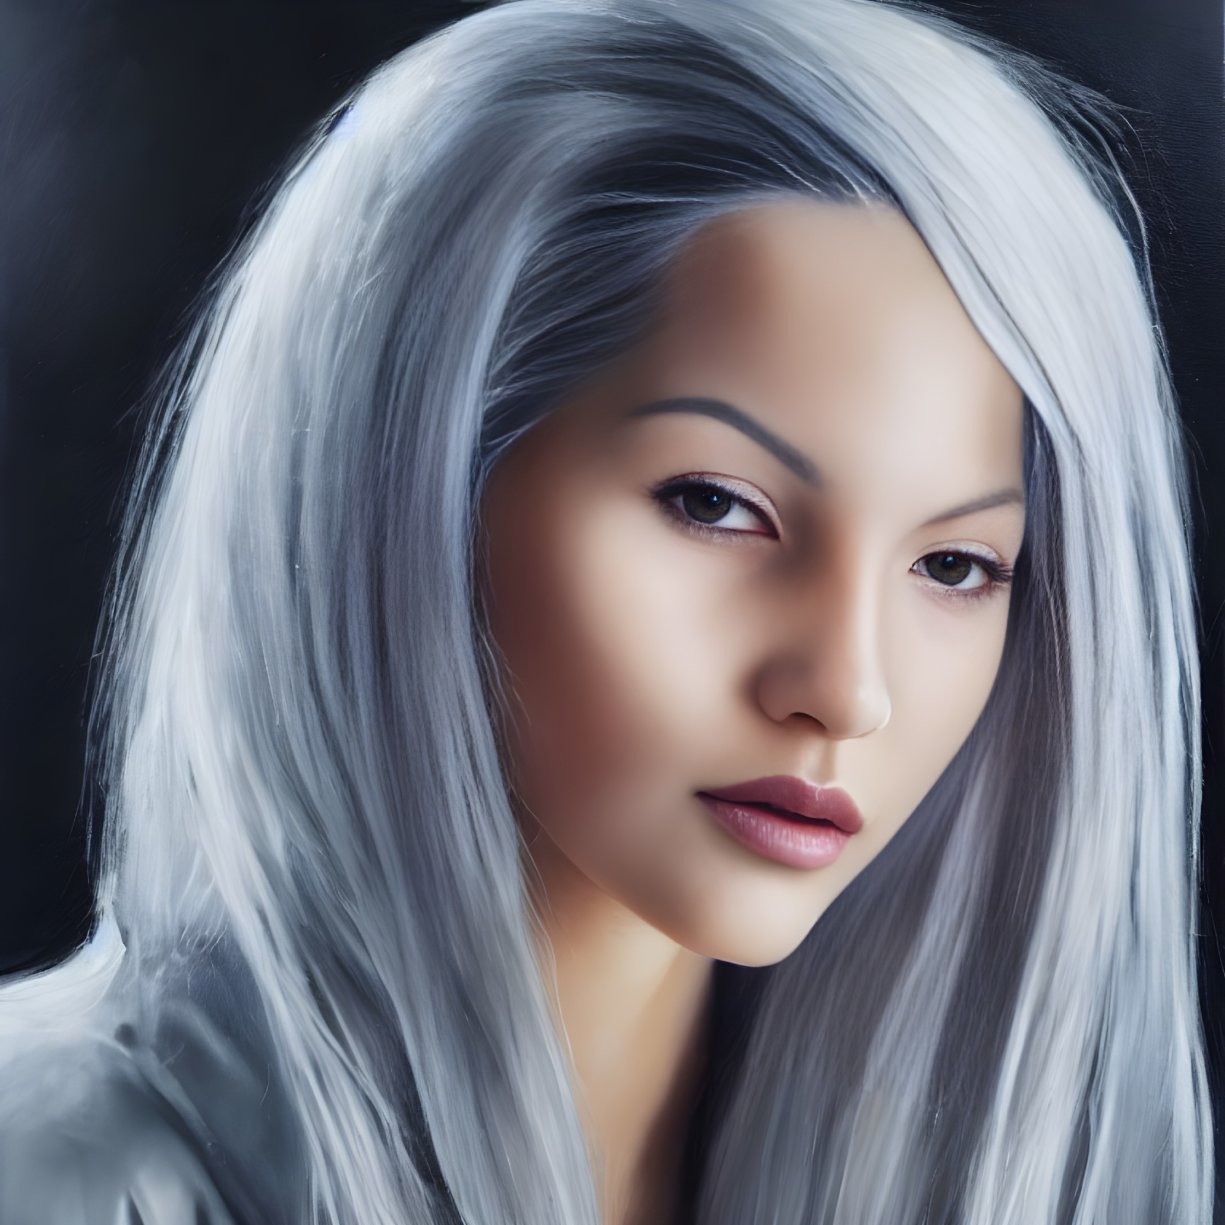 Portrait of Woman with Long White Hair and Dark Eyes on Dark Background